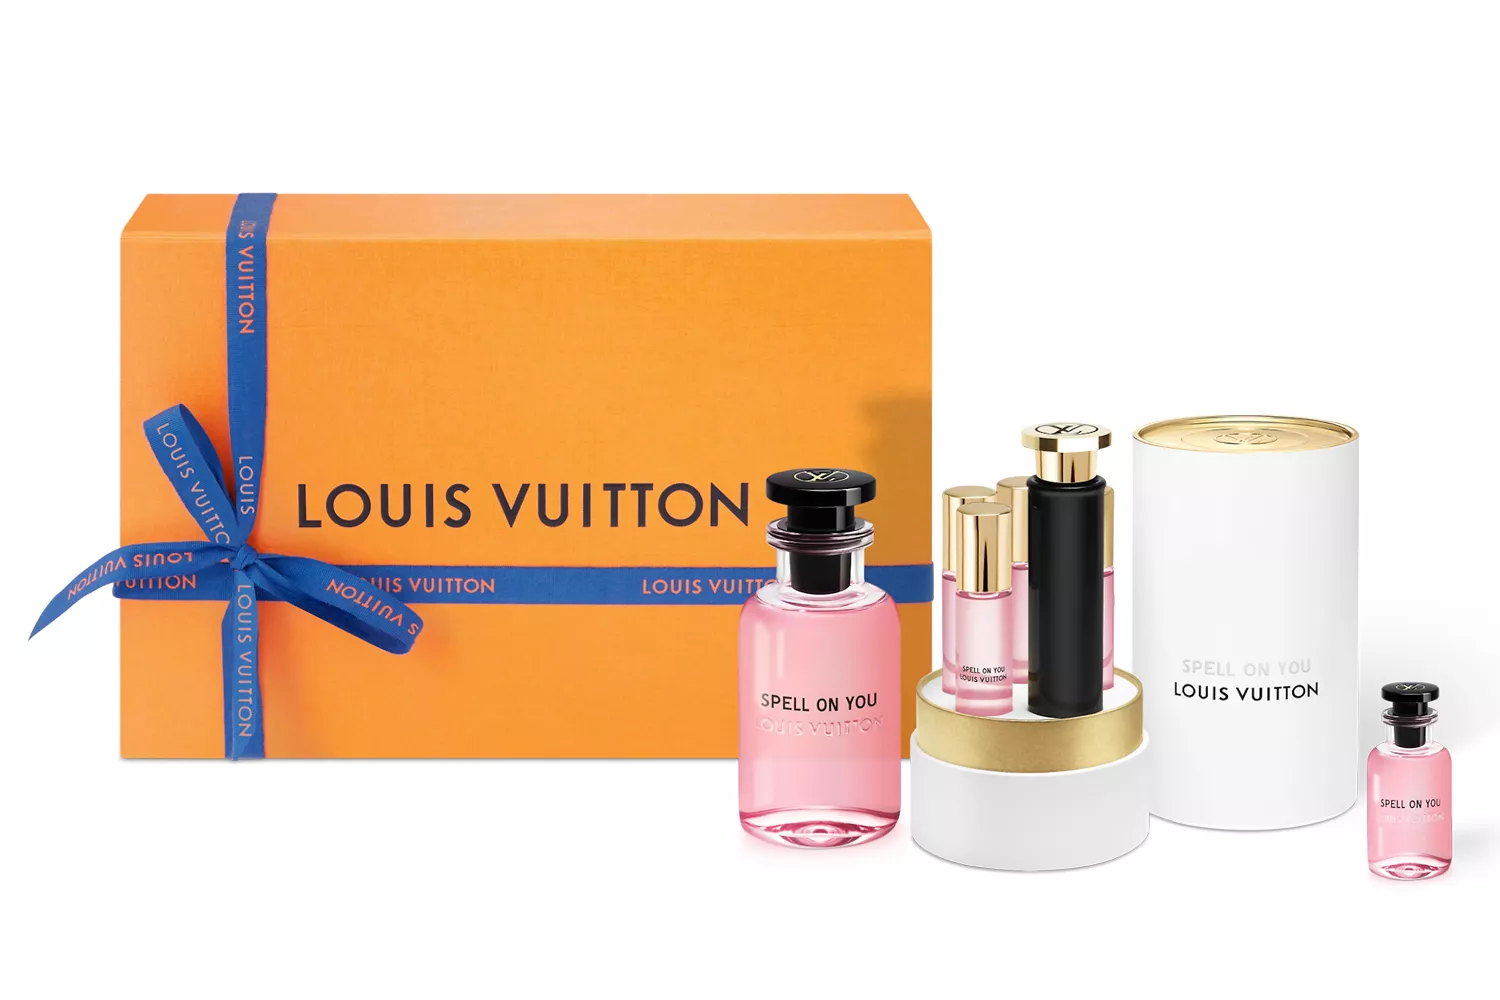 Louis Vuitton Spell On You Fragrance and Travel Set